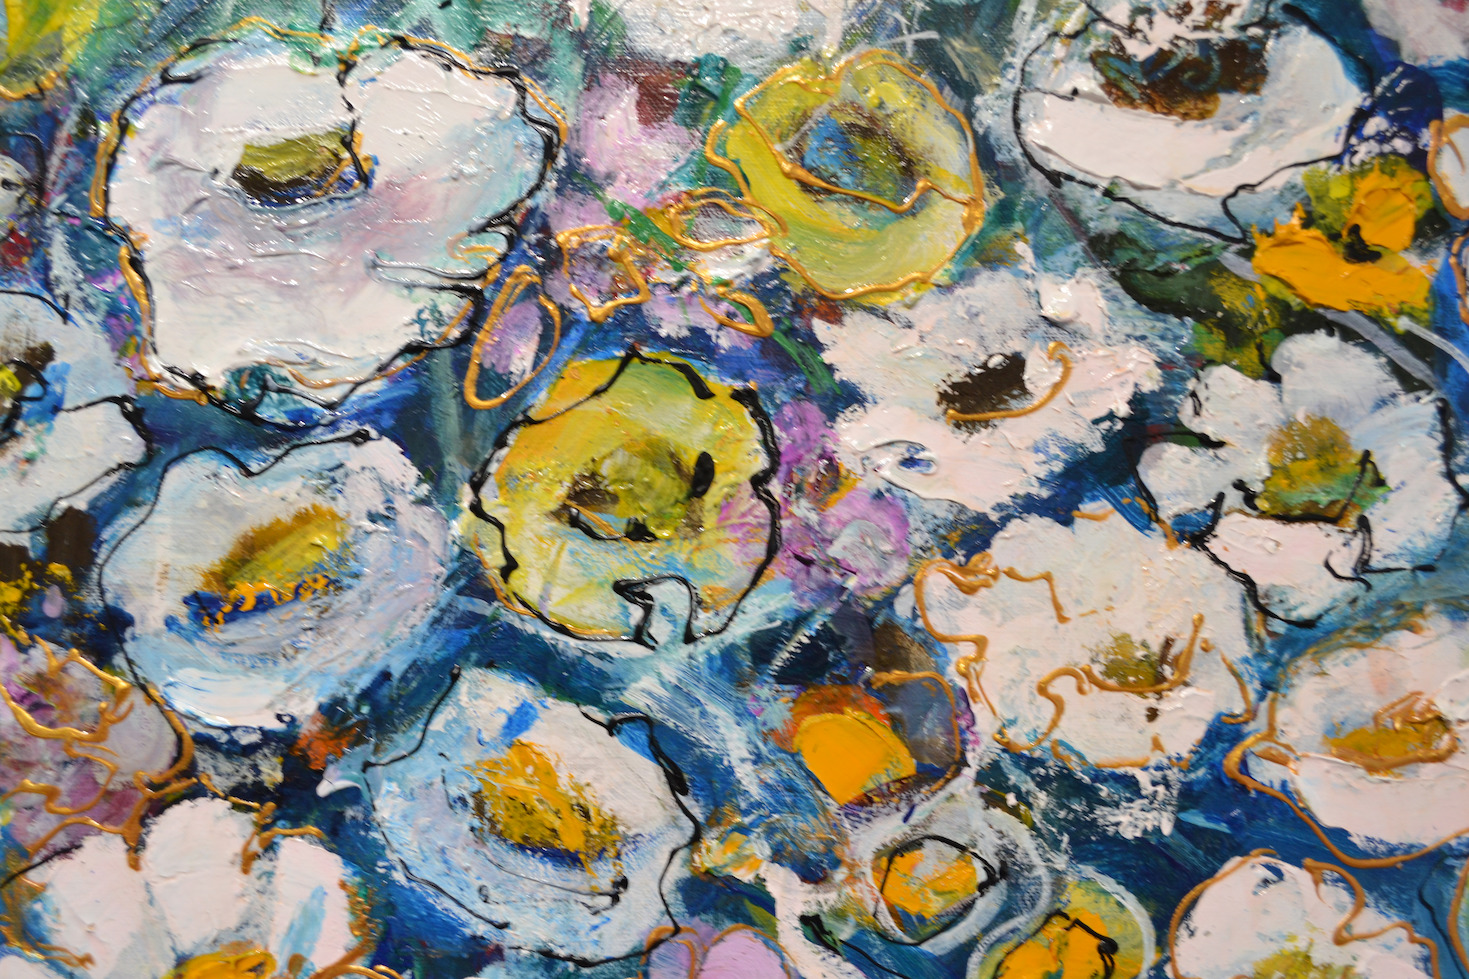 Close Up Detail Of Acrylic Painting "Blue Tones" By Lucette Dalozzo